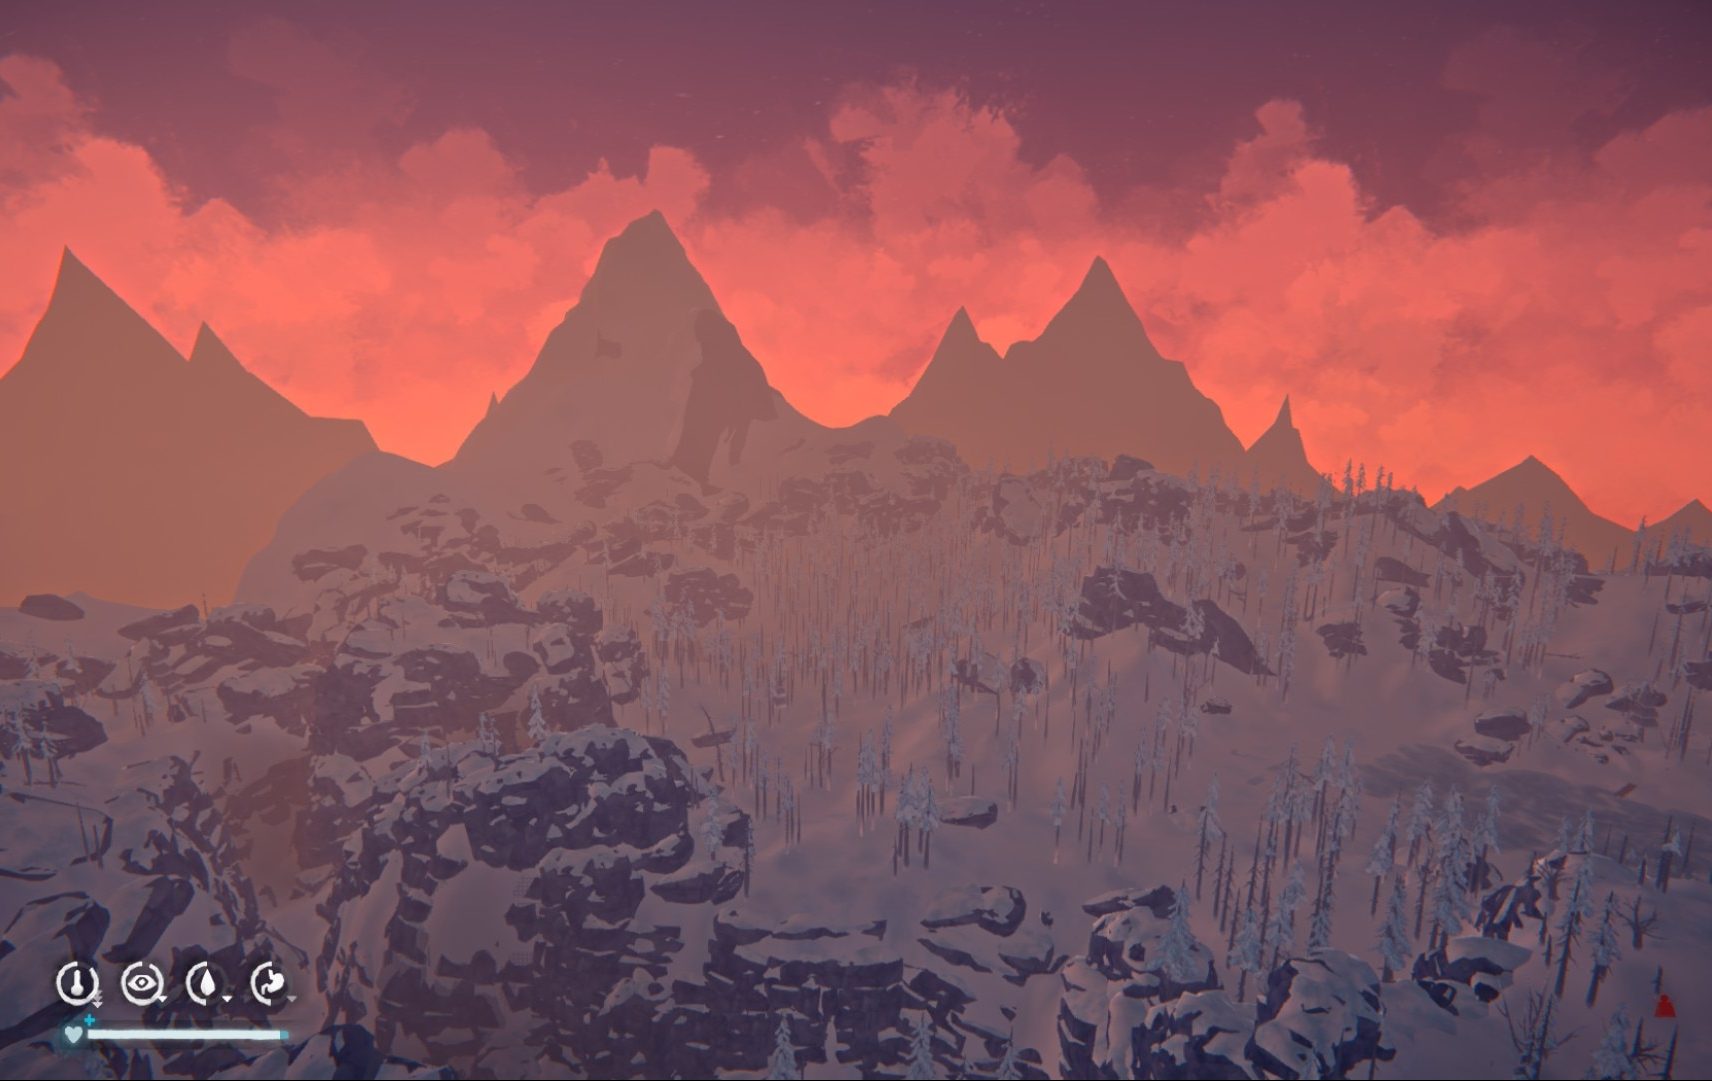 A screenshot from "The Long Dark": a sunrise over some snowy mountains, seen from a high peak